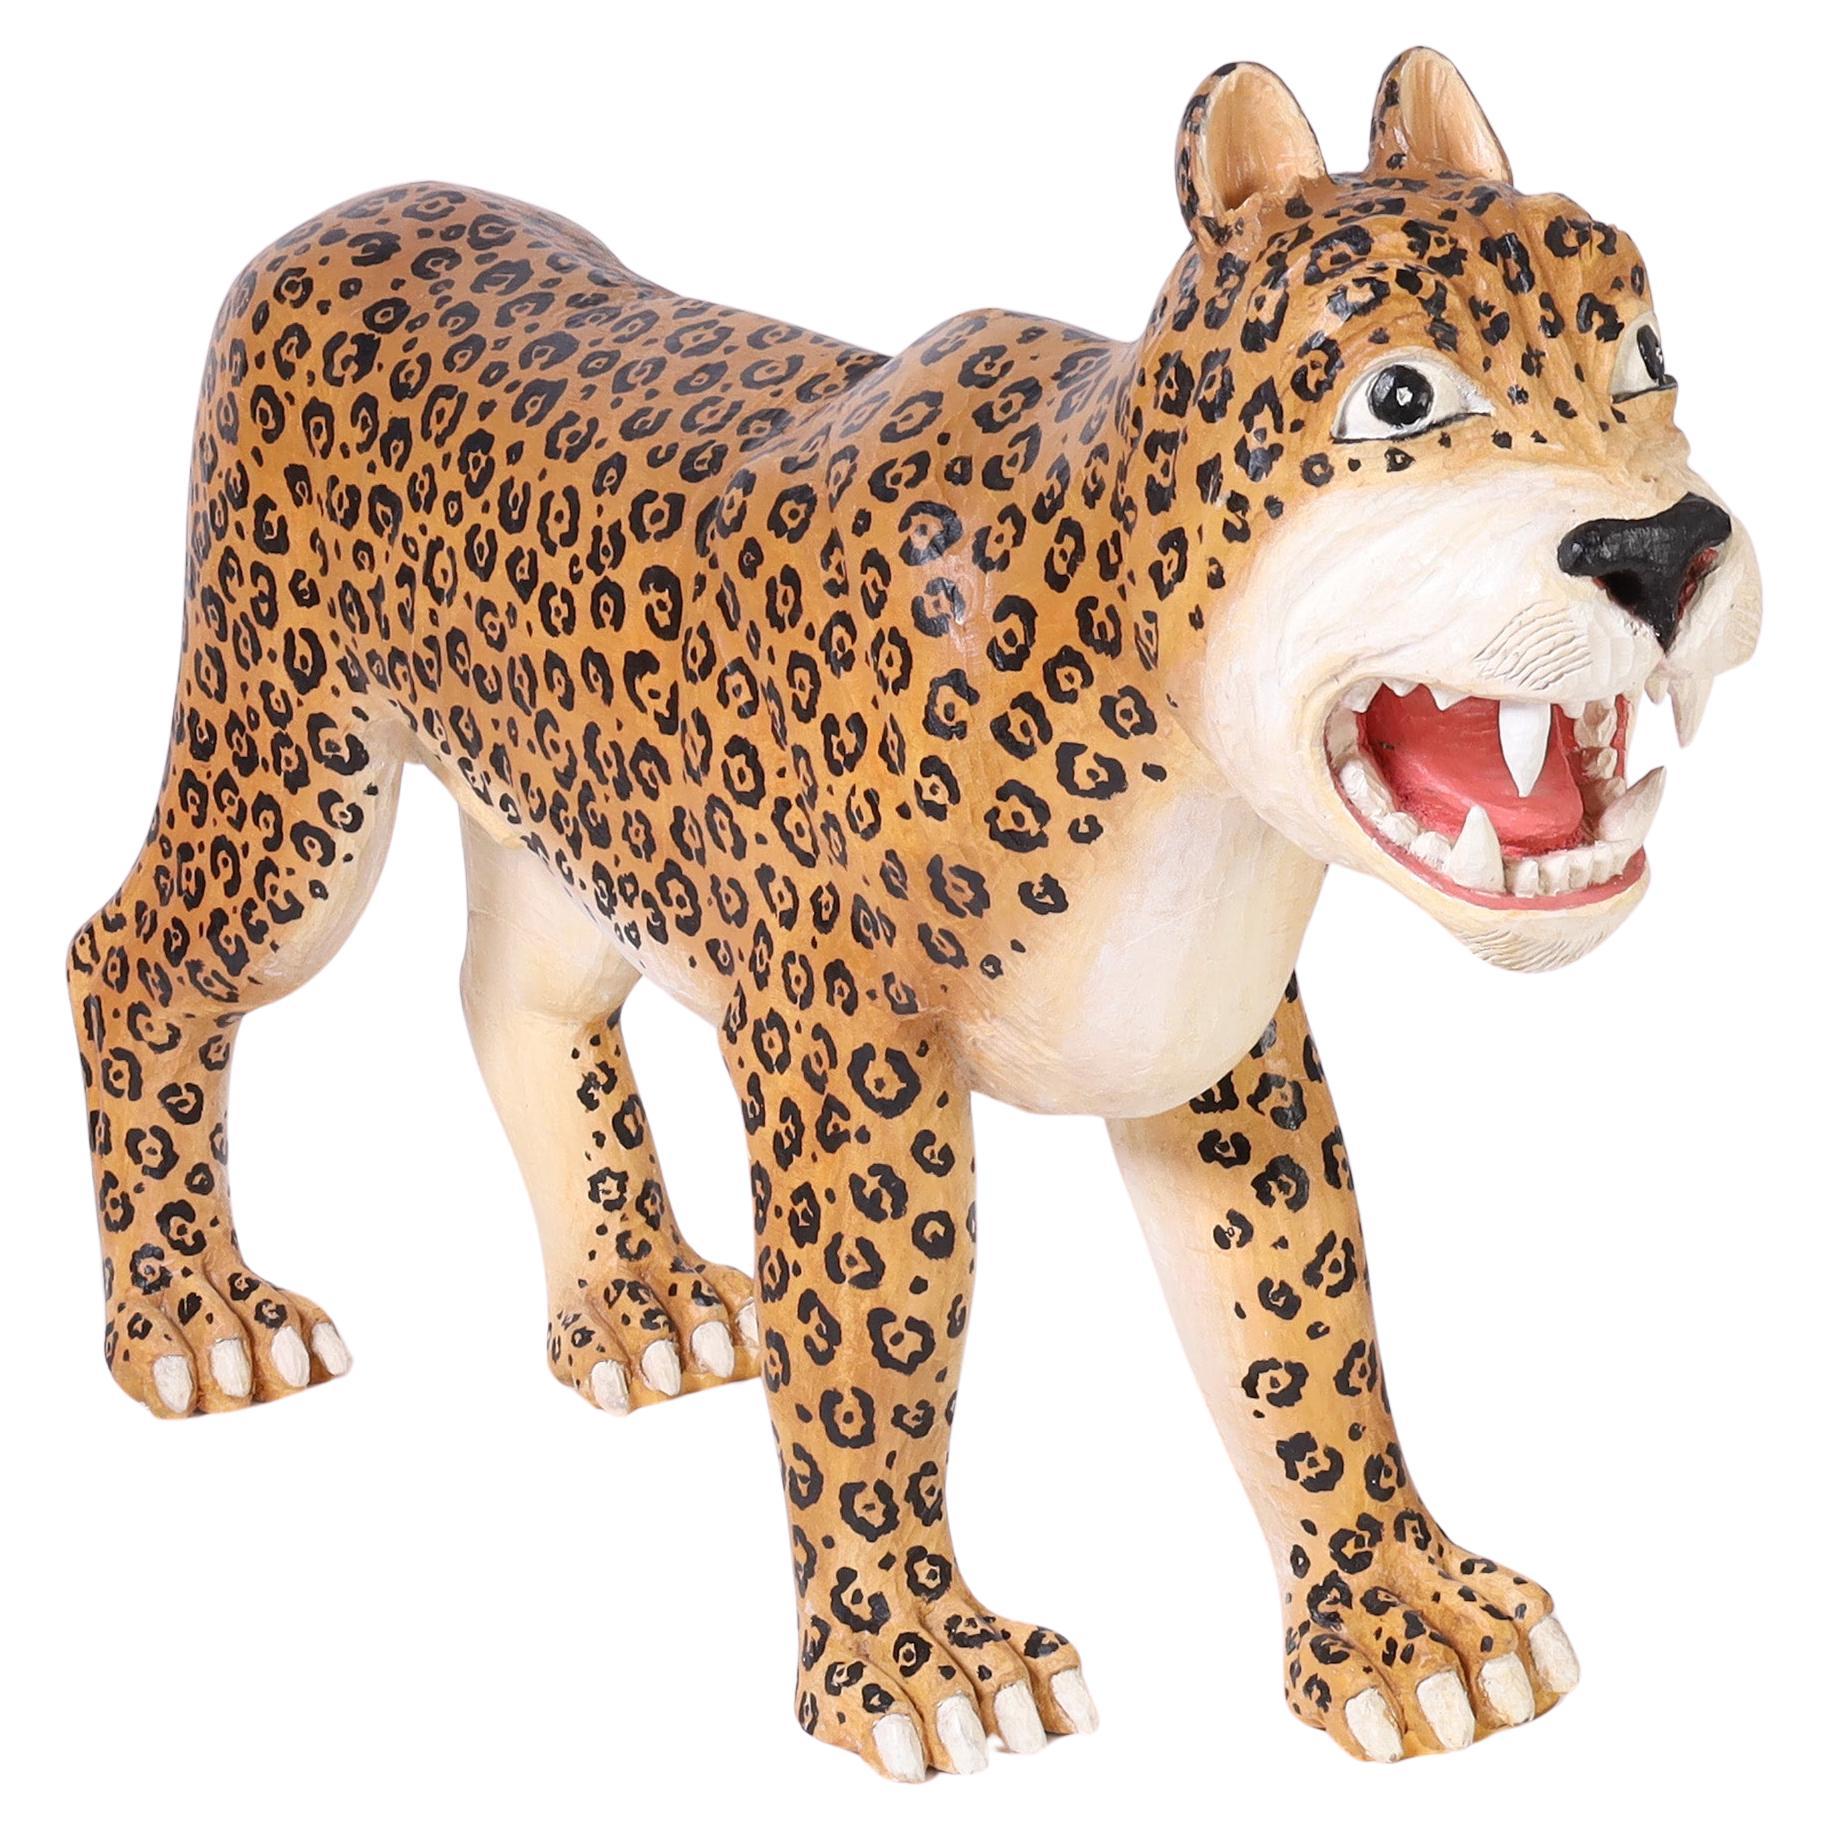 Carved and Painted Wood Jaguar or Big Cat